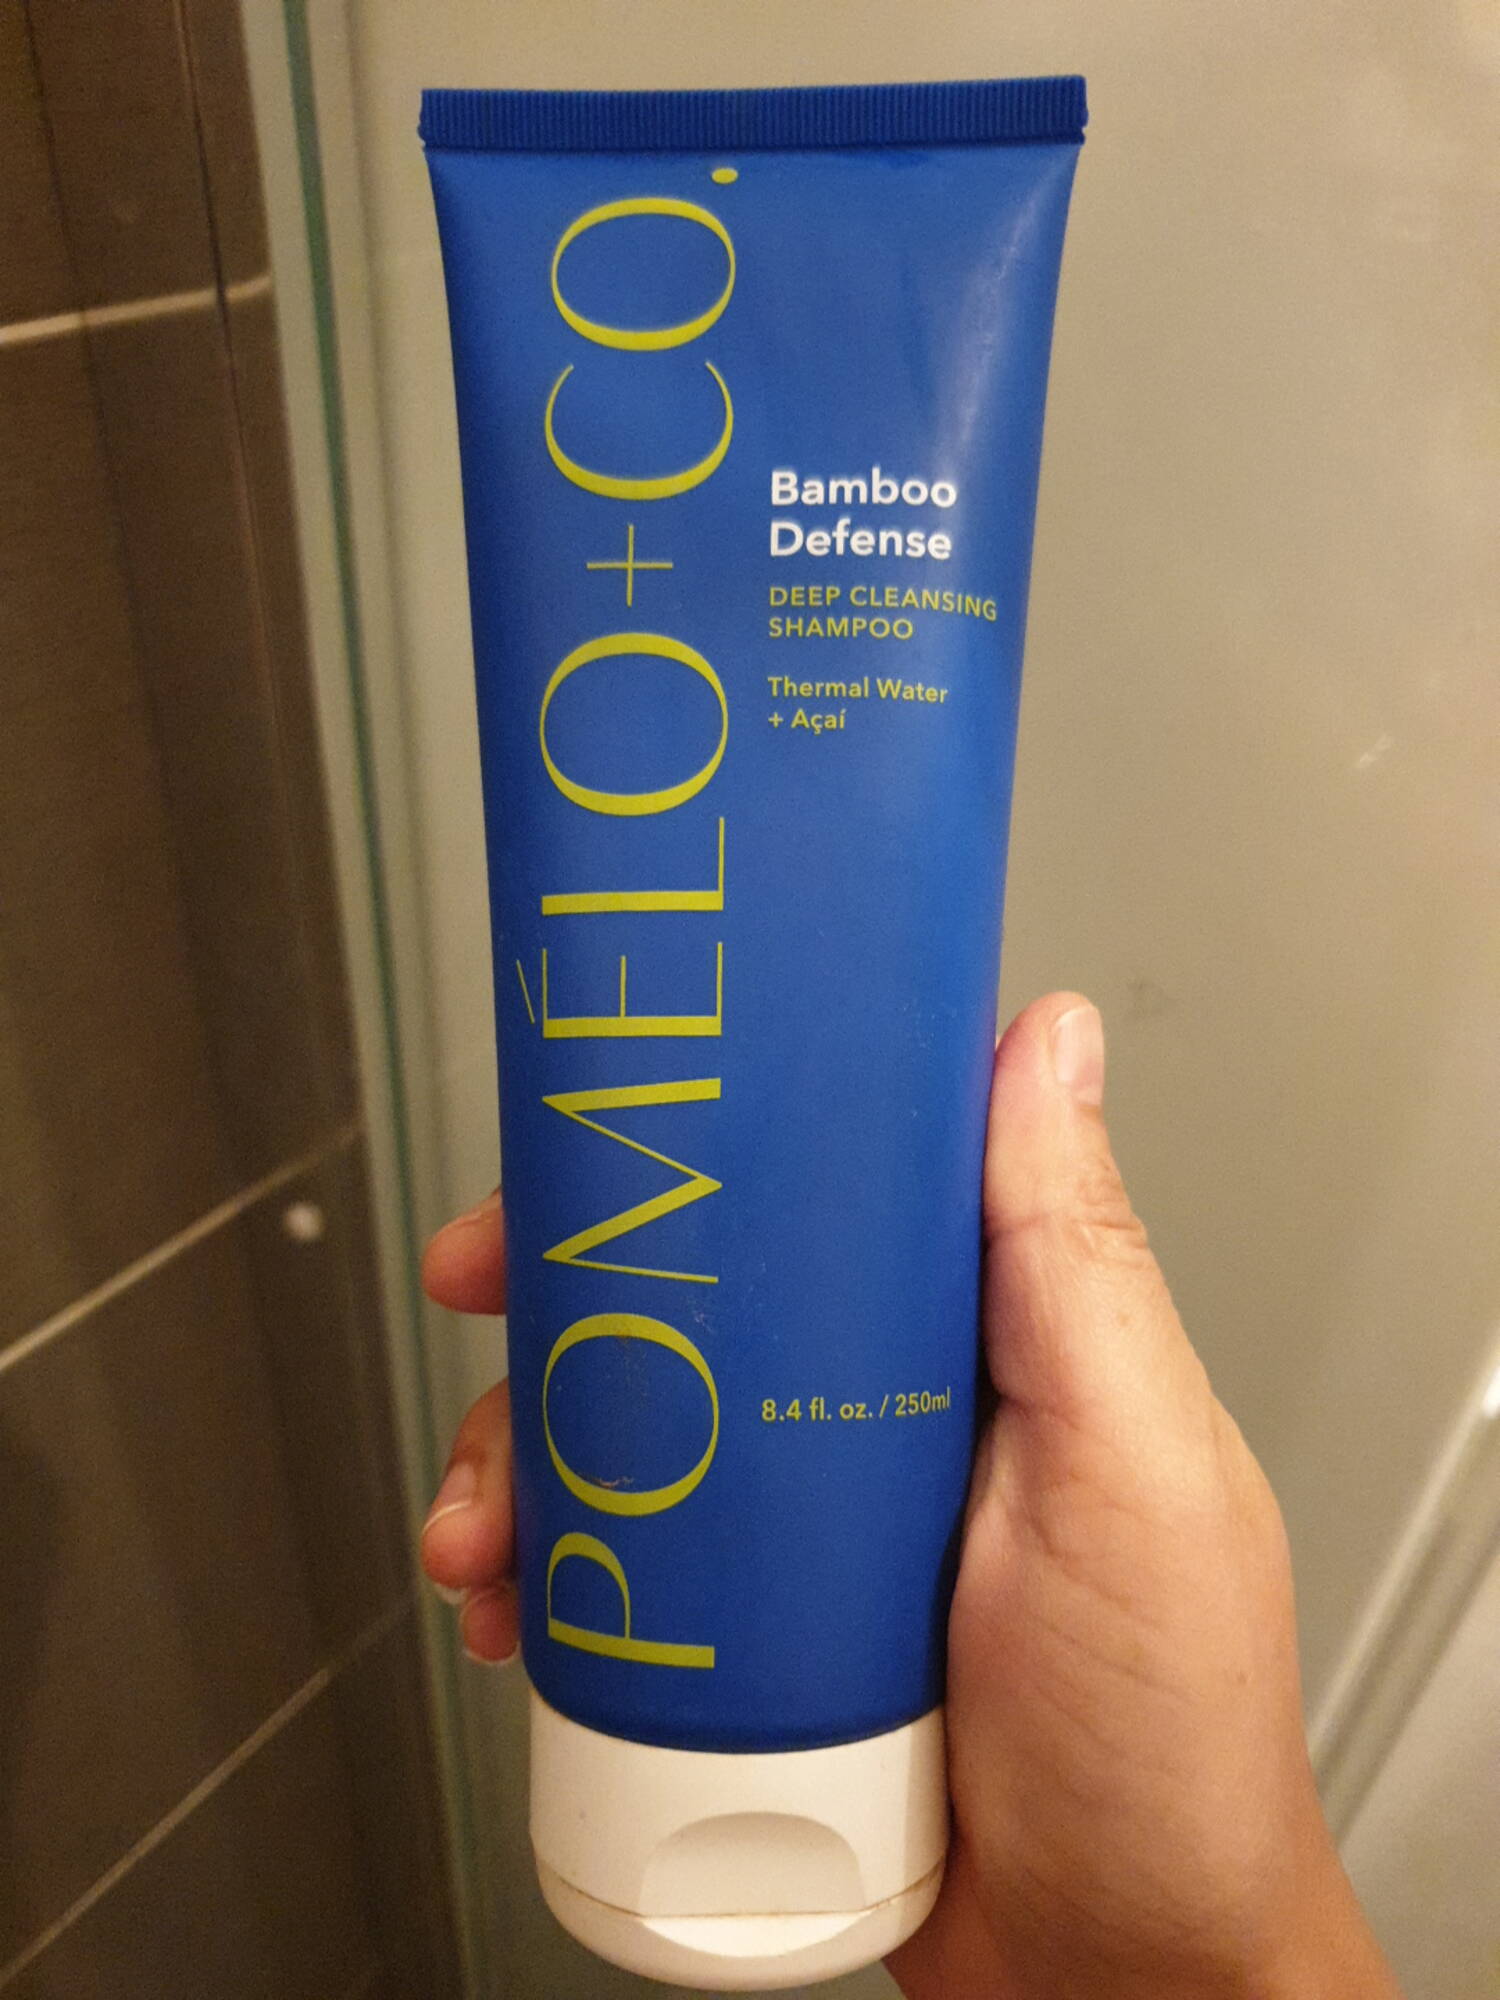 POMELO-CO - Bamboo defense - Deep cleansing shampoo